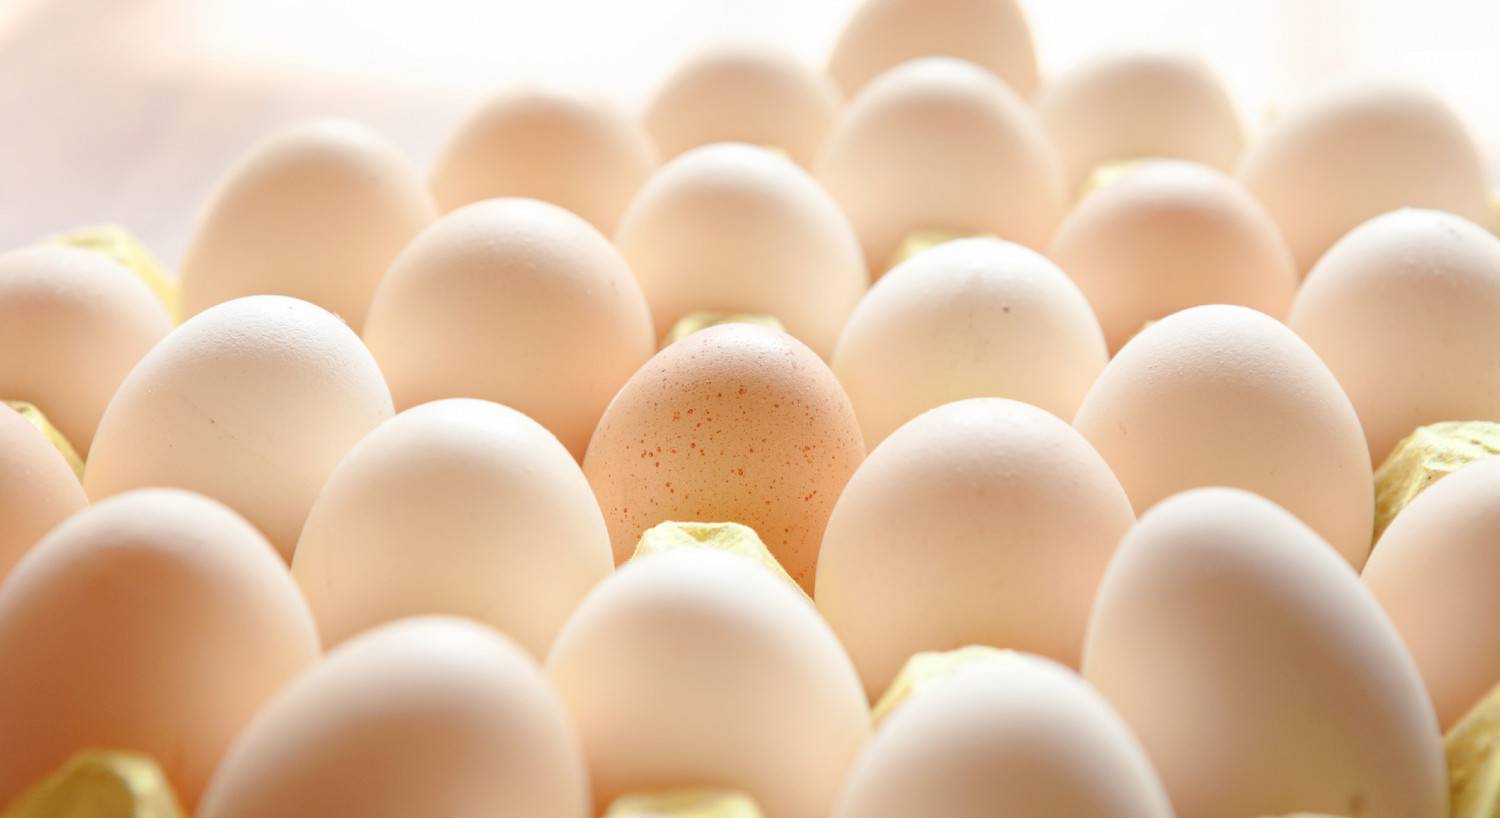 A crate of white eggs in the light.